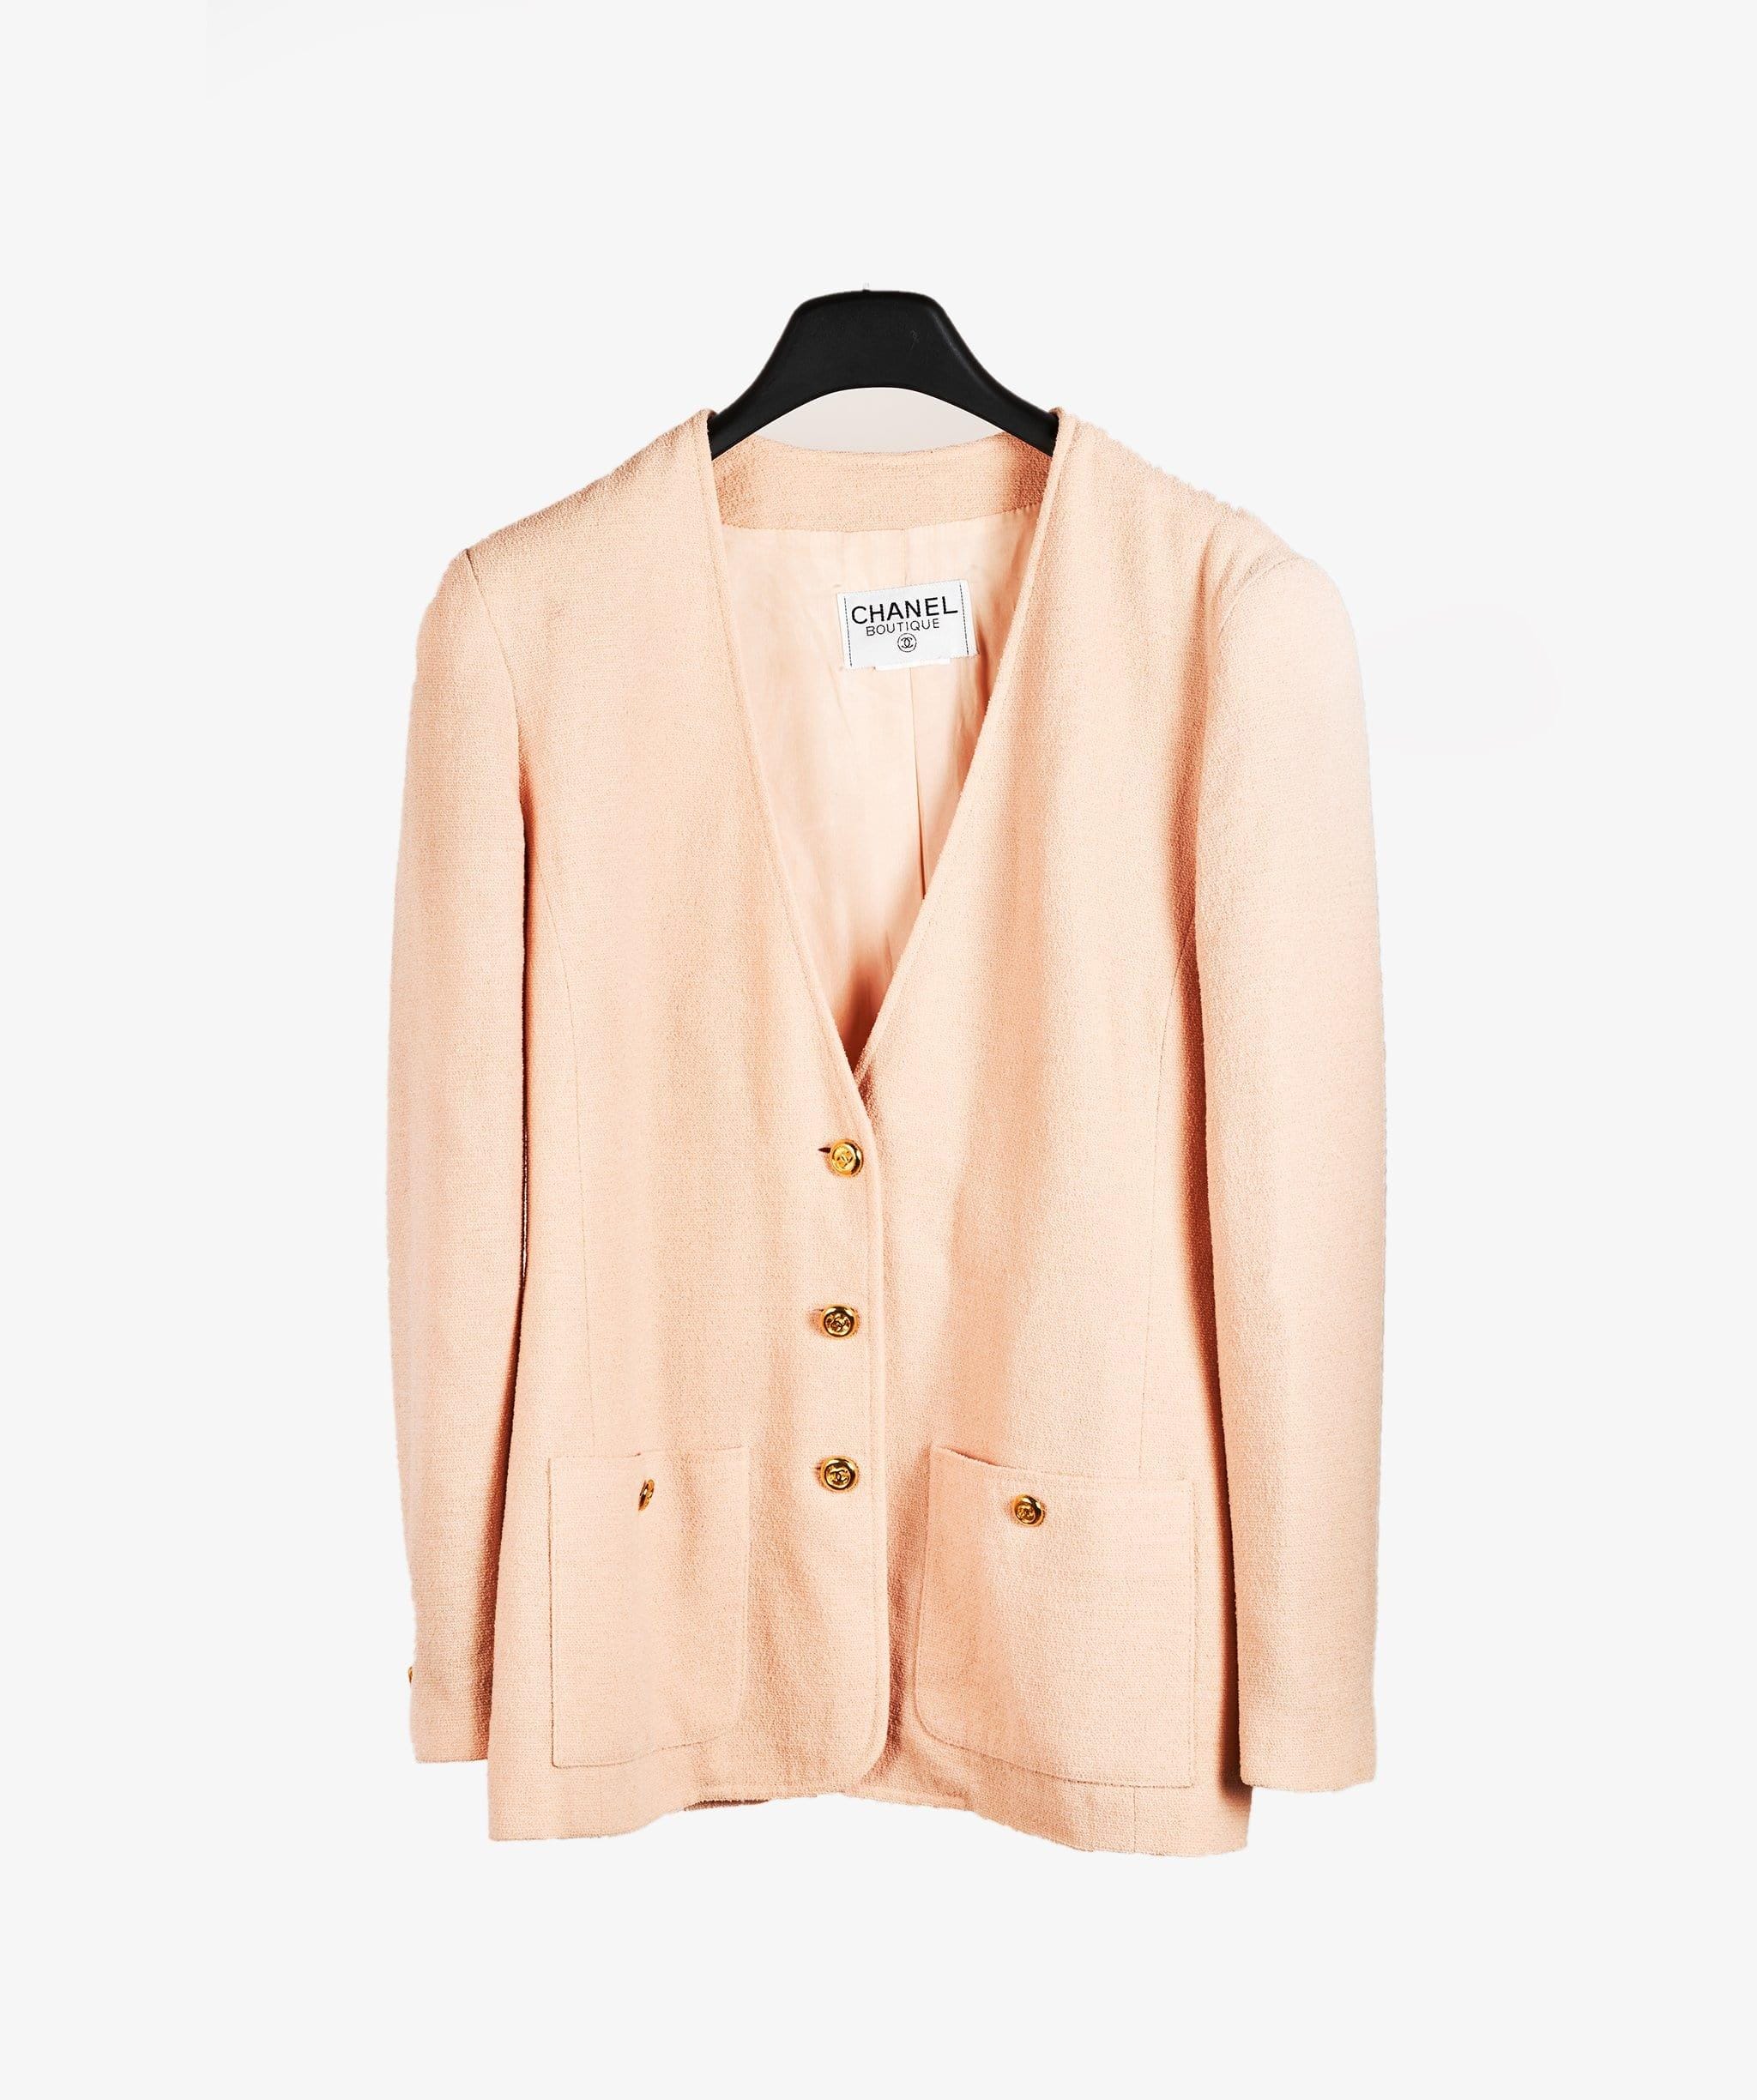 Chanel Chanel Blush Pink Jacket-NW2409